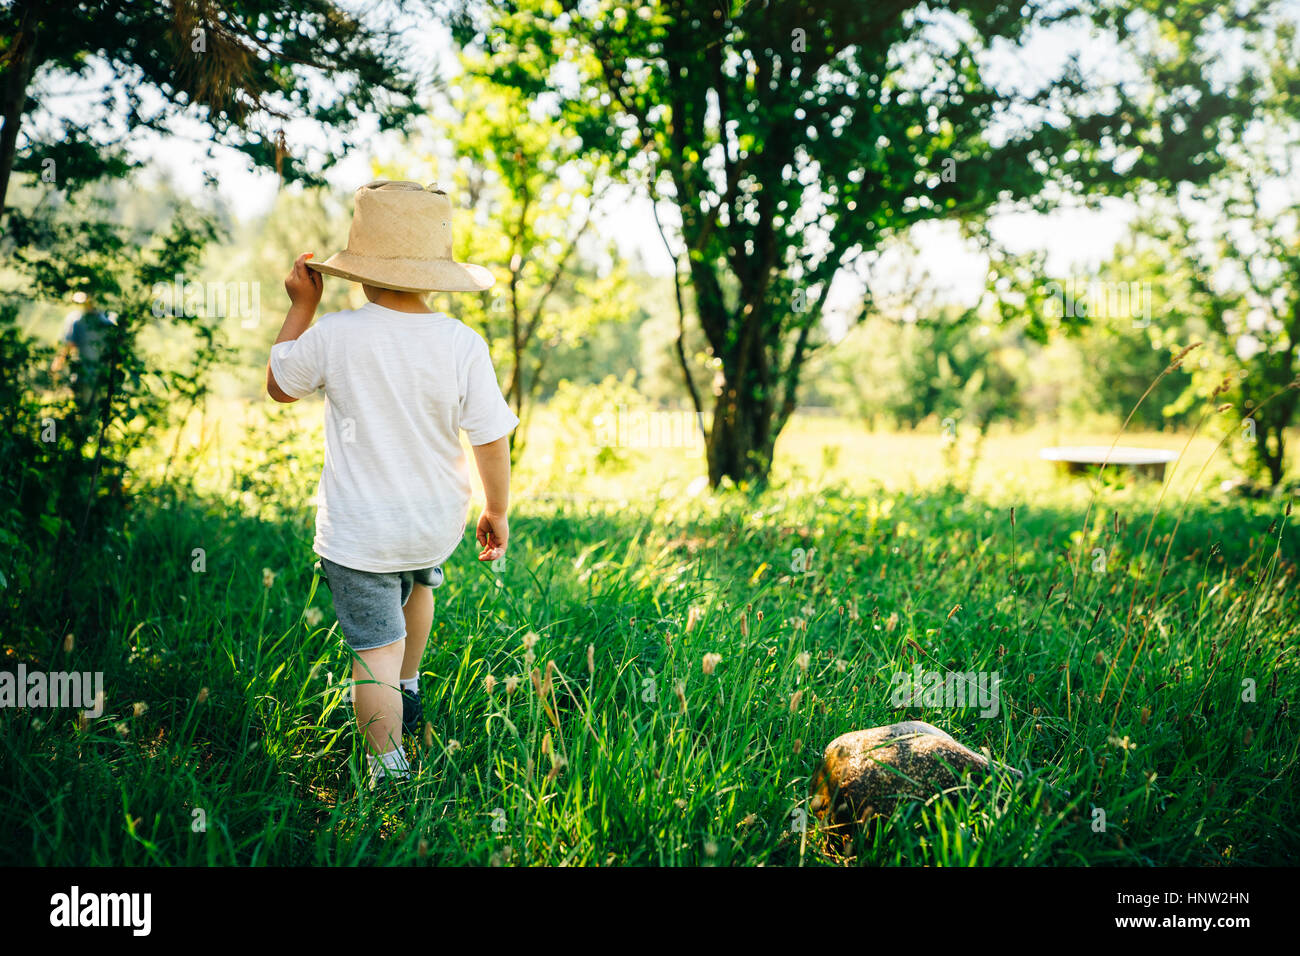 Woman wearing hat walking in grass Banque D'Images